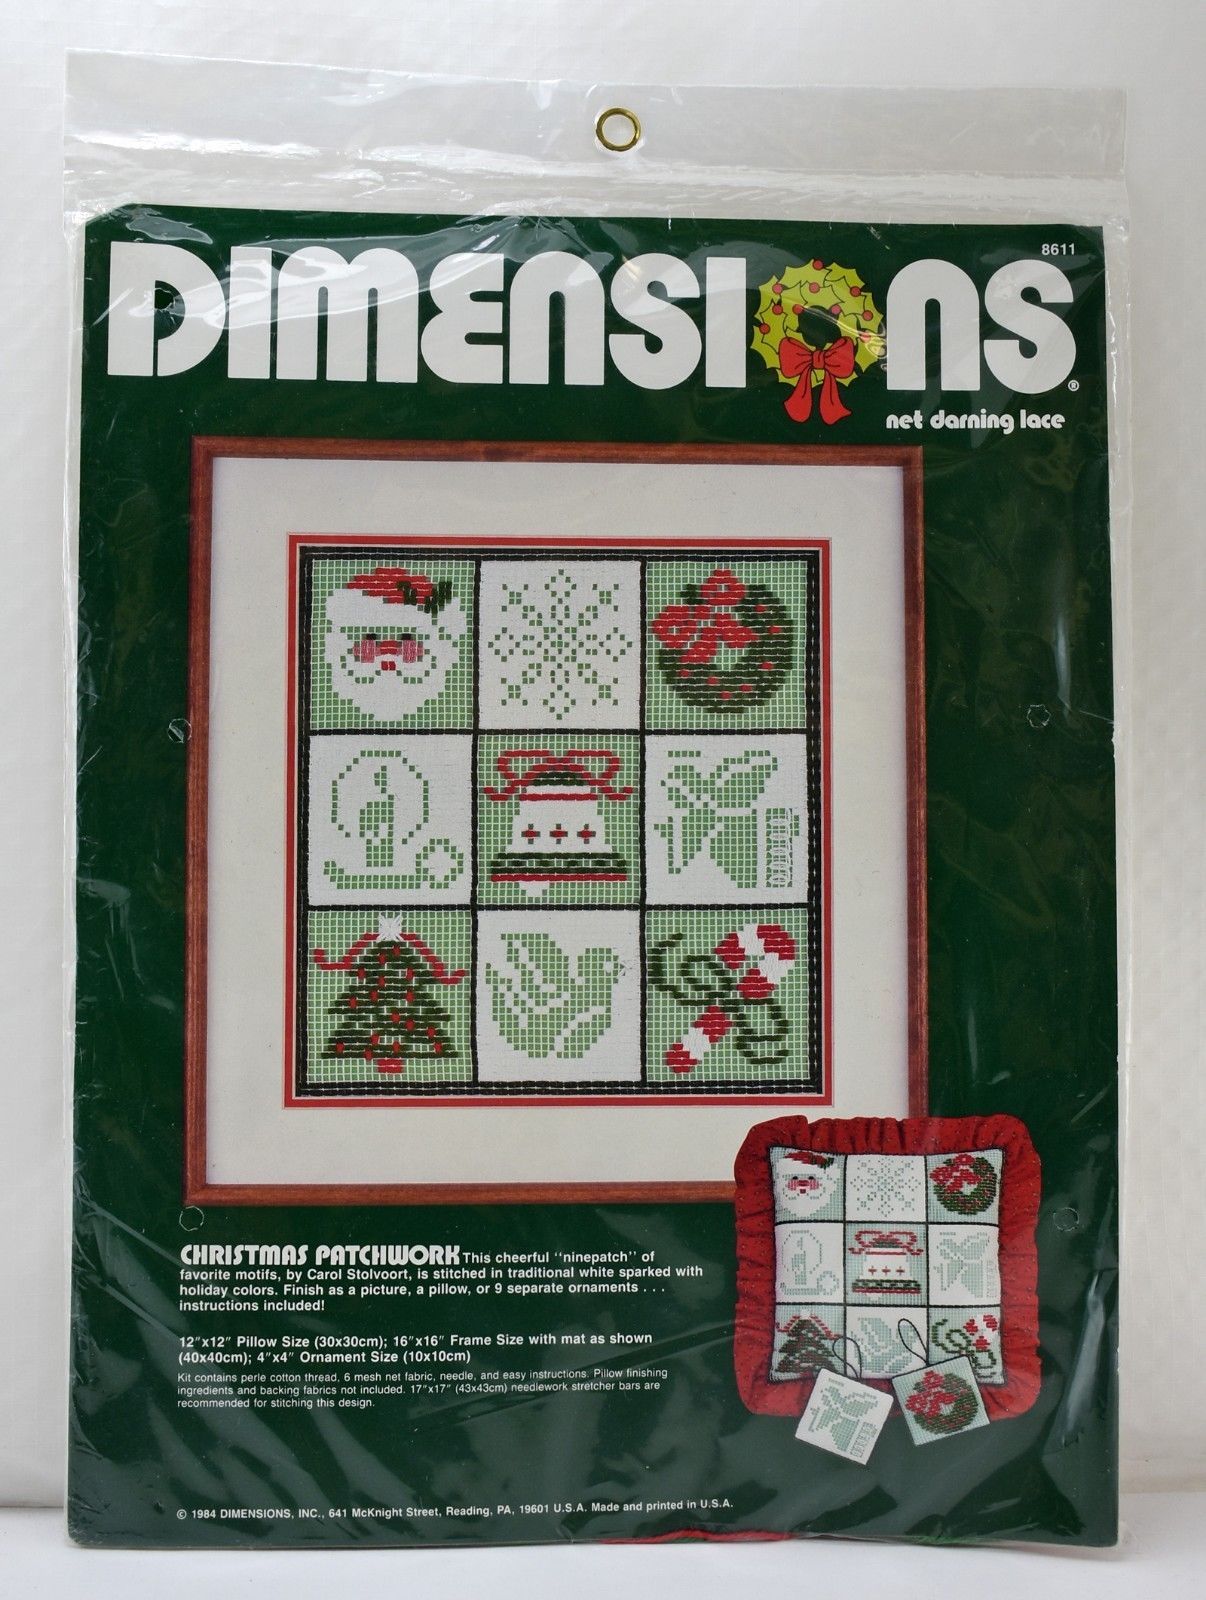 Primary image for Dimensions Christmas Patchwork Net Darning Lace Kit - 1 Picture or 9 Ornaments